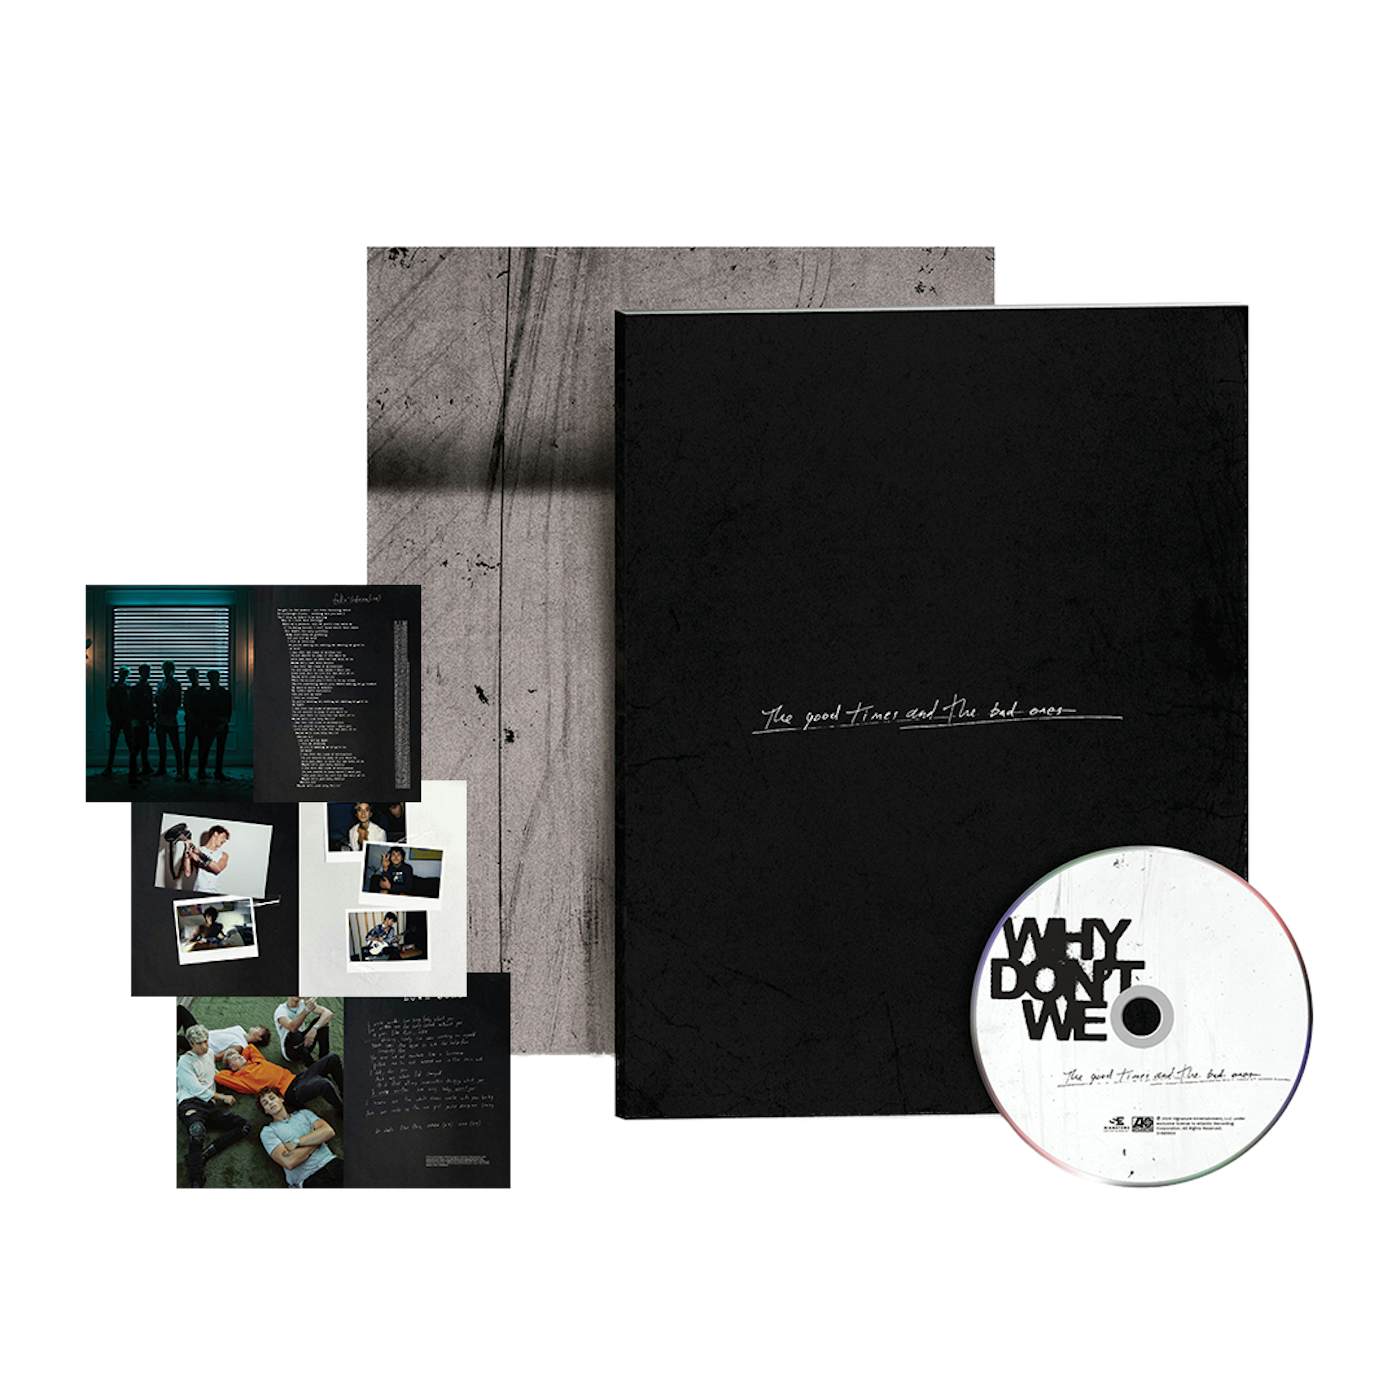 Why Don't We The Good Times And The Bad Ones Zine Collectible CD